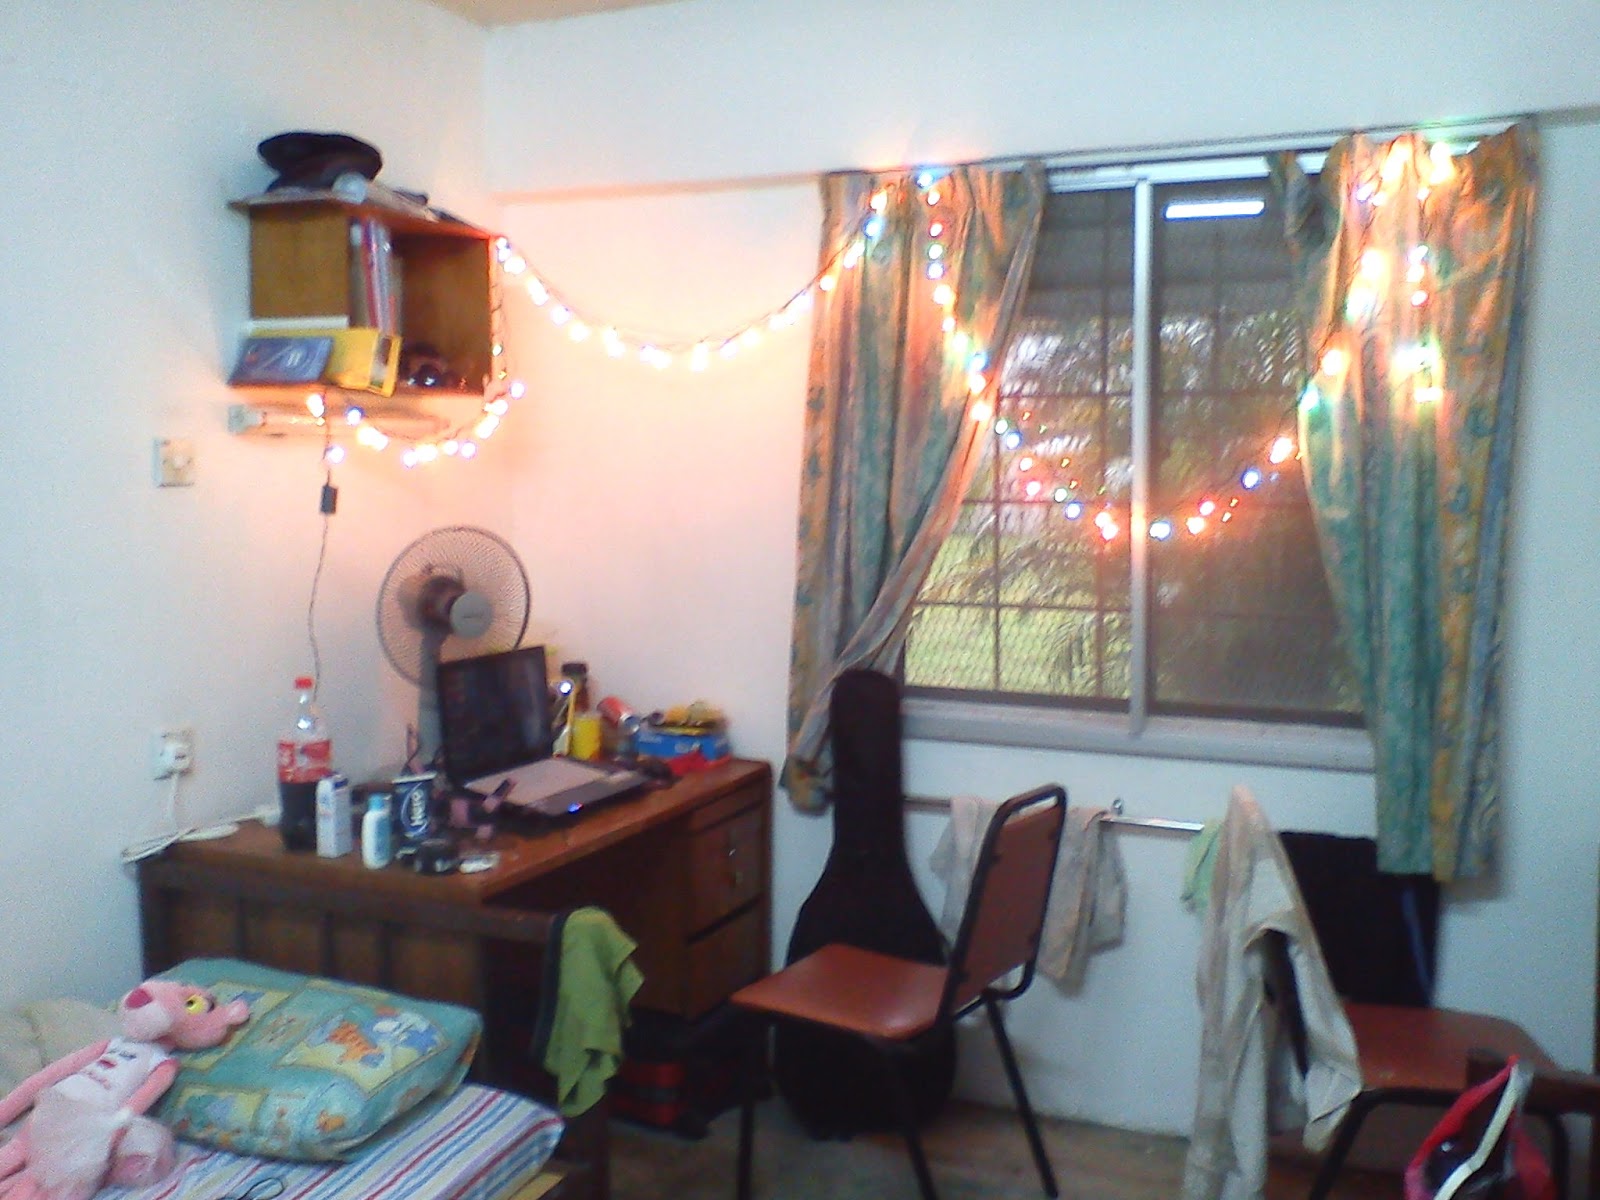 Welcome to my Blog: I decorate my hostel room 01